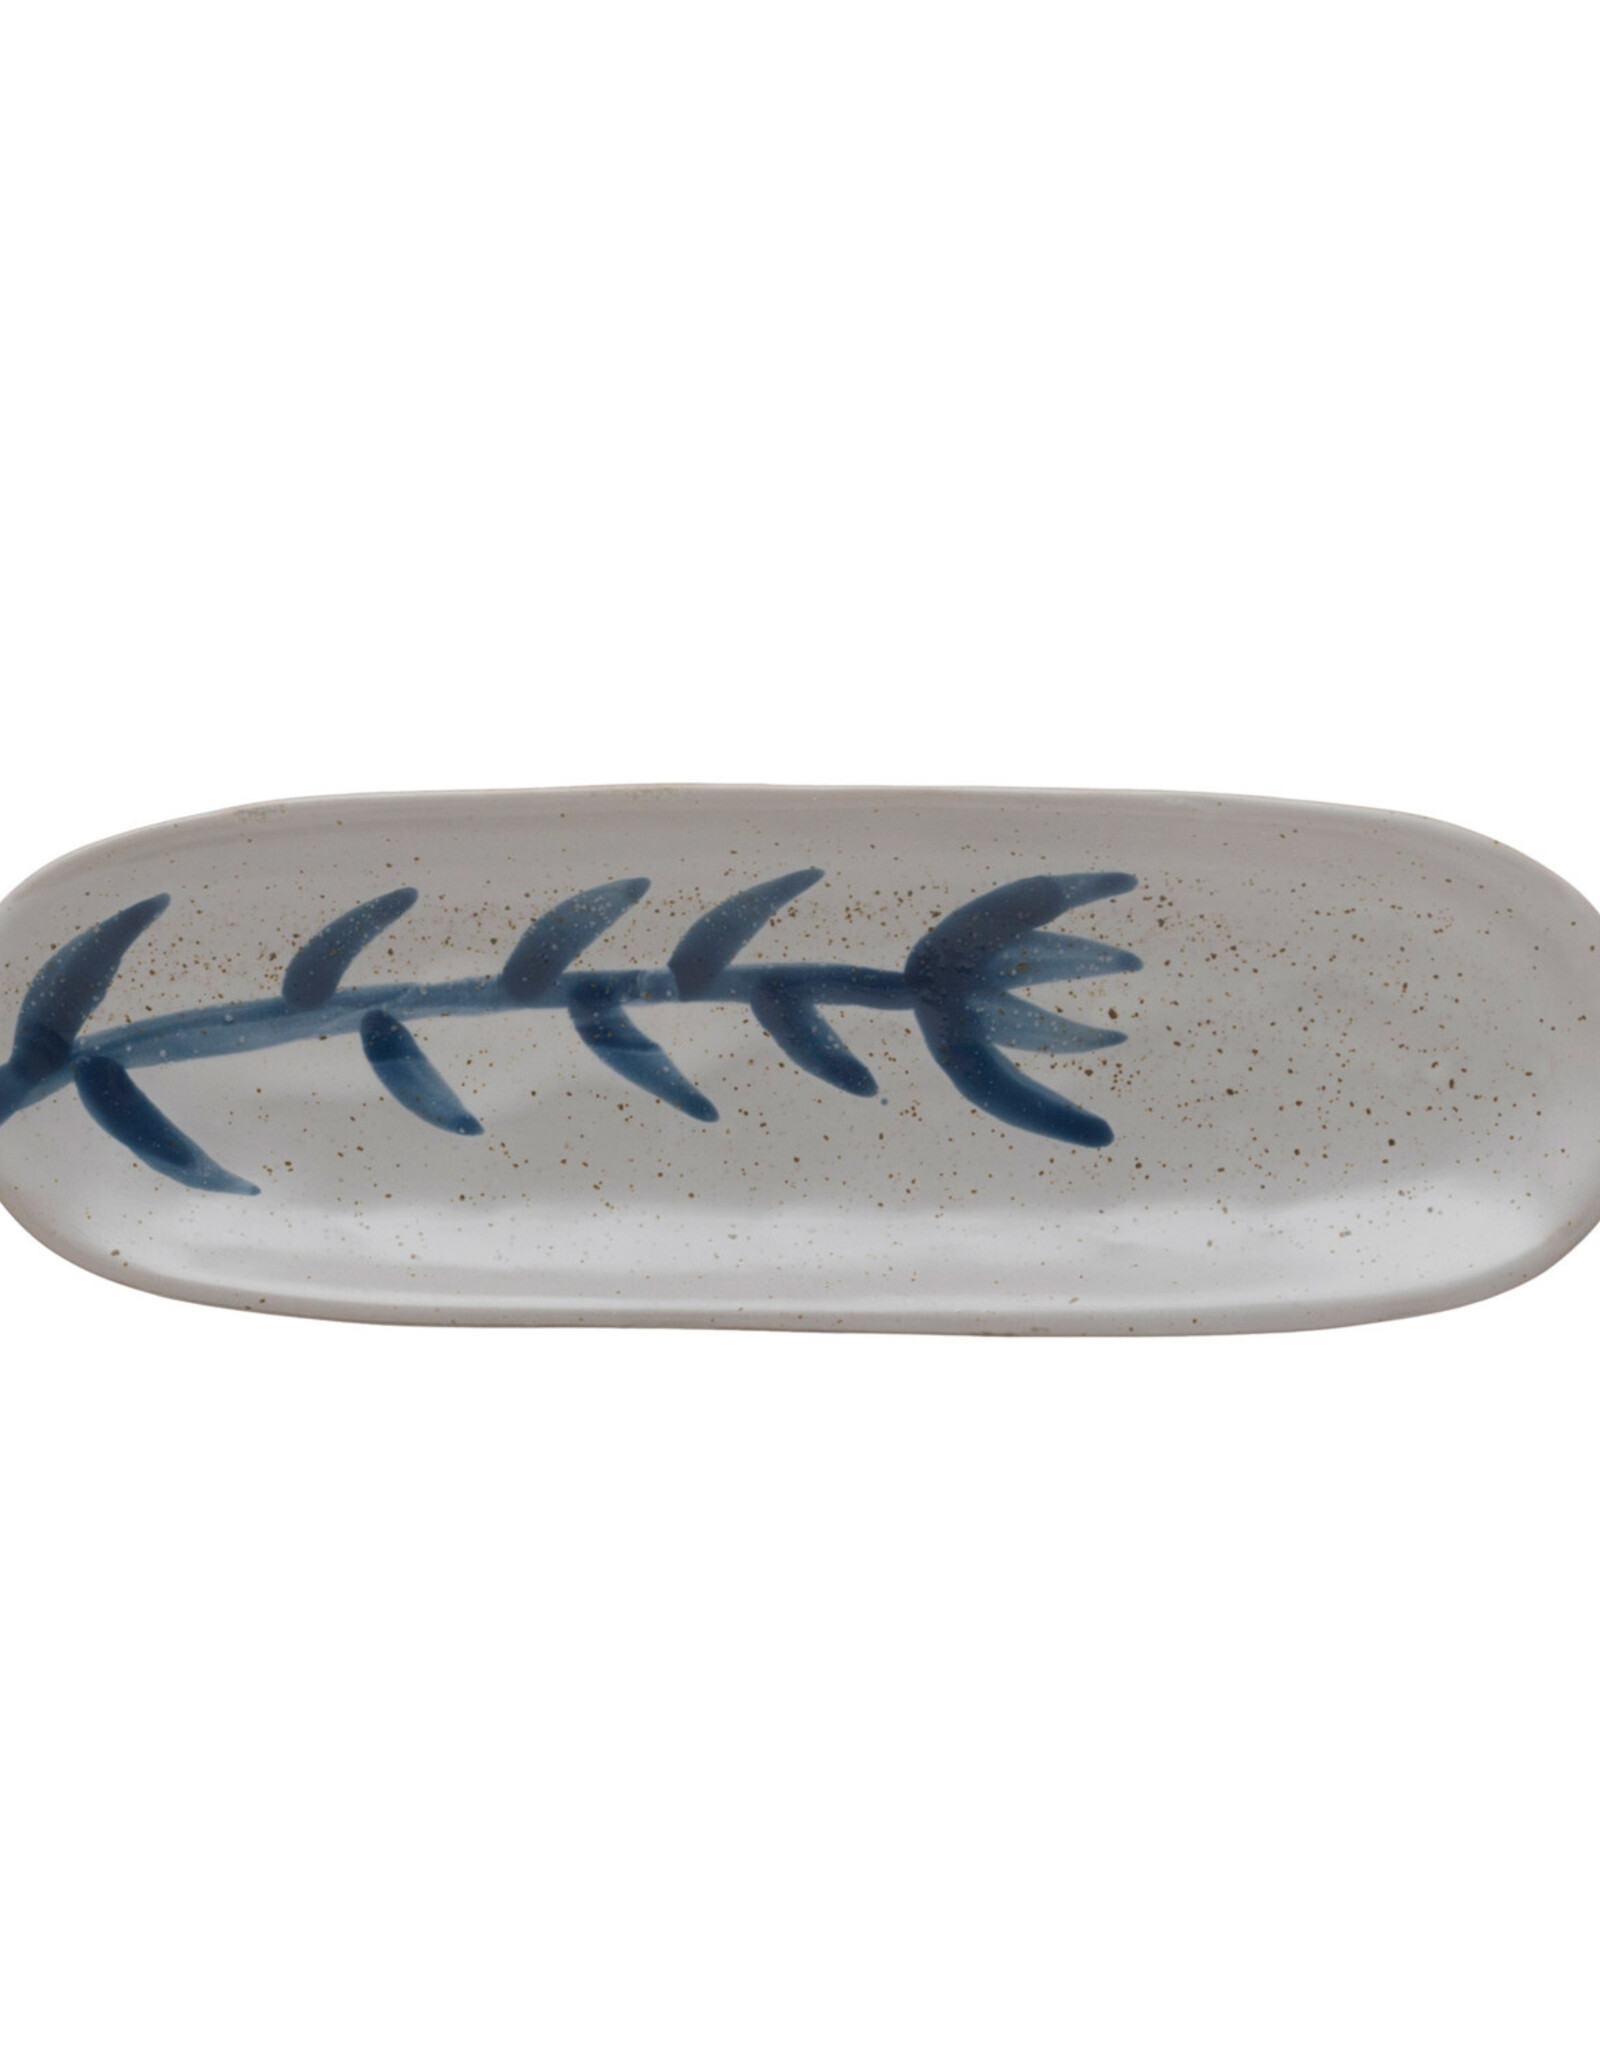 Creative Co-Op Oval Plate - Blue Floral Detail